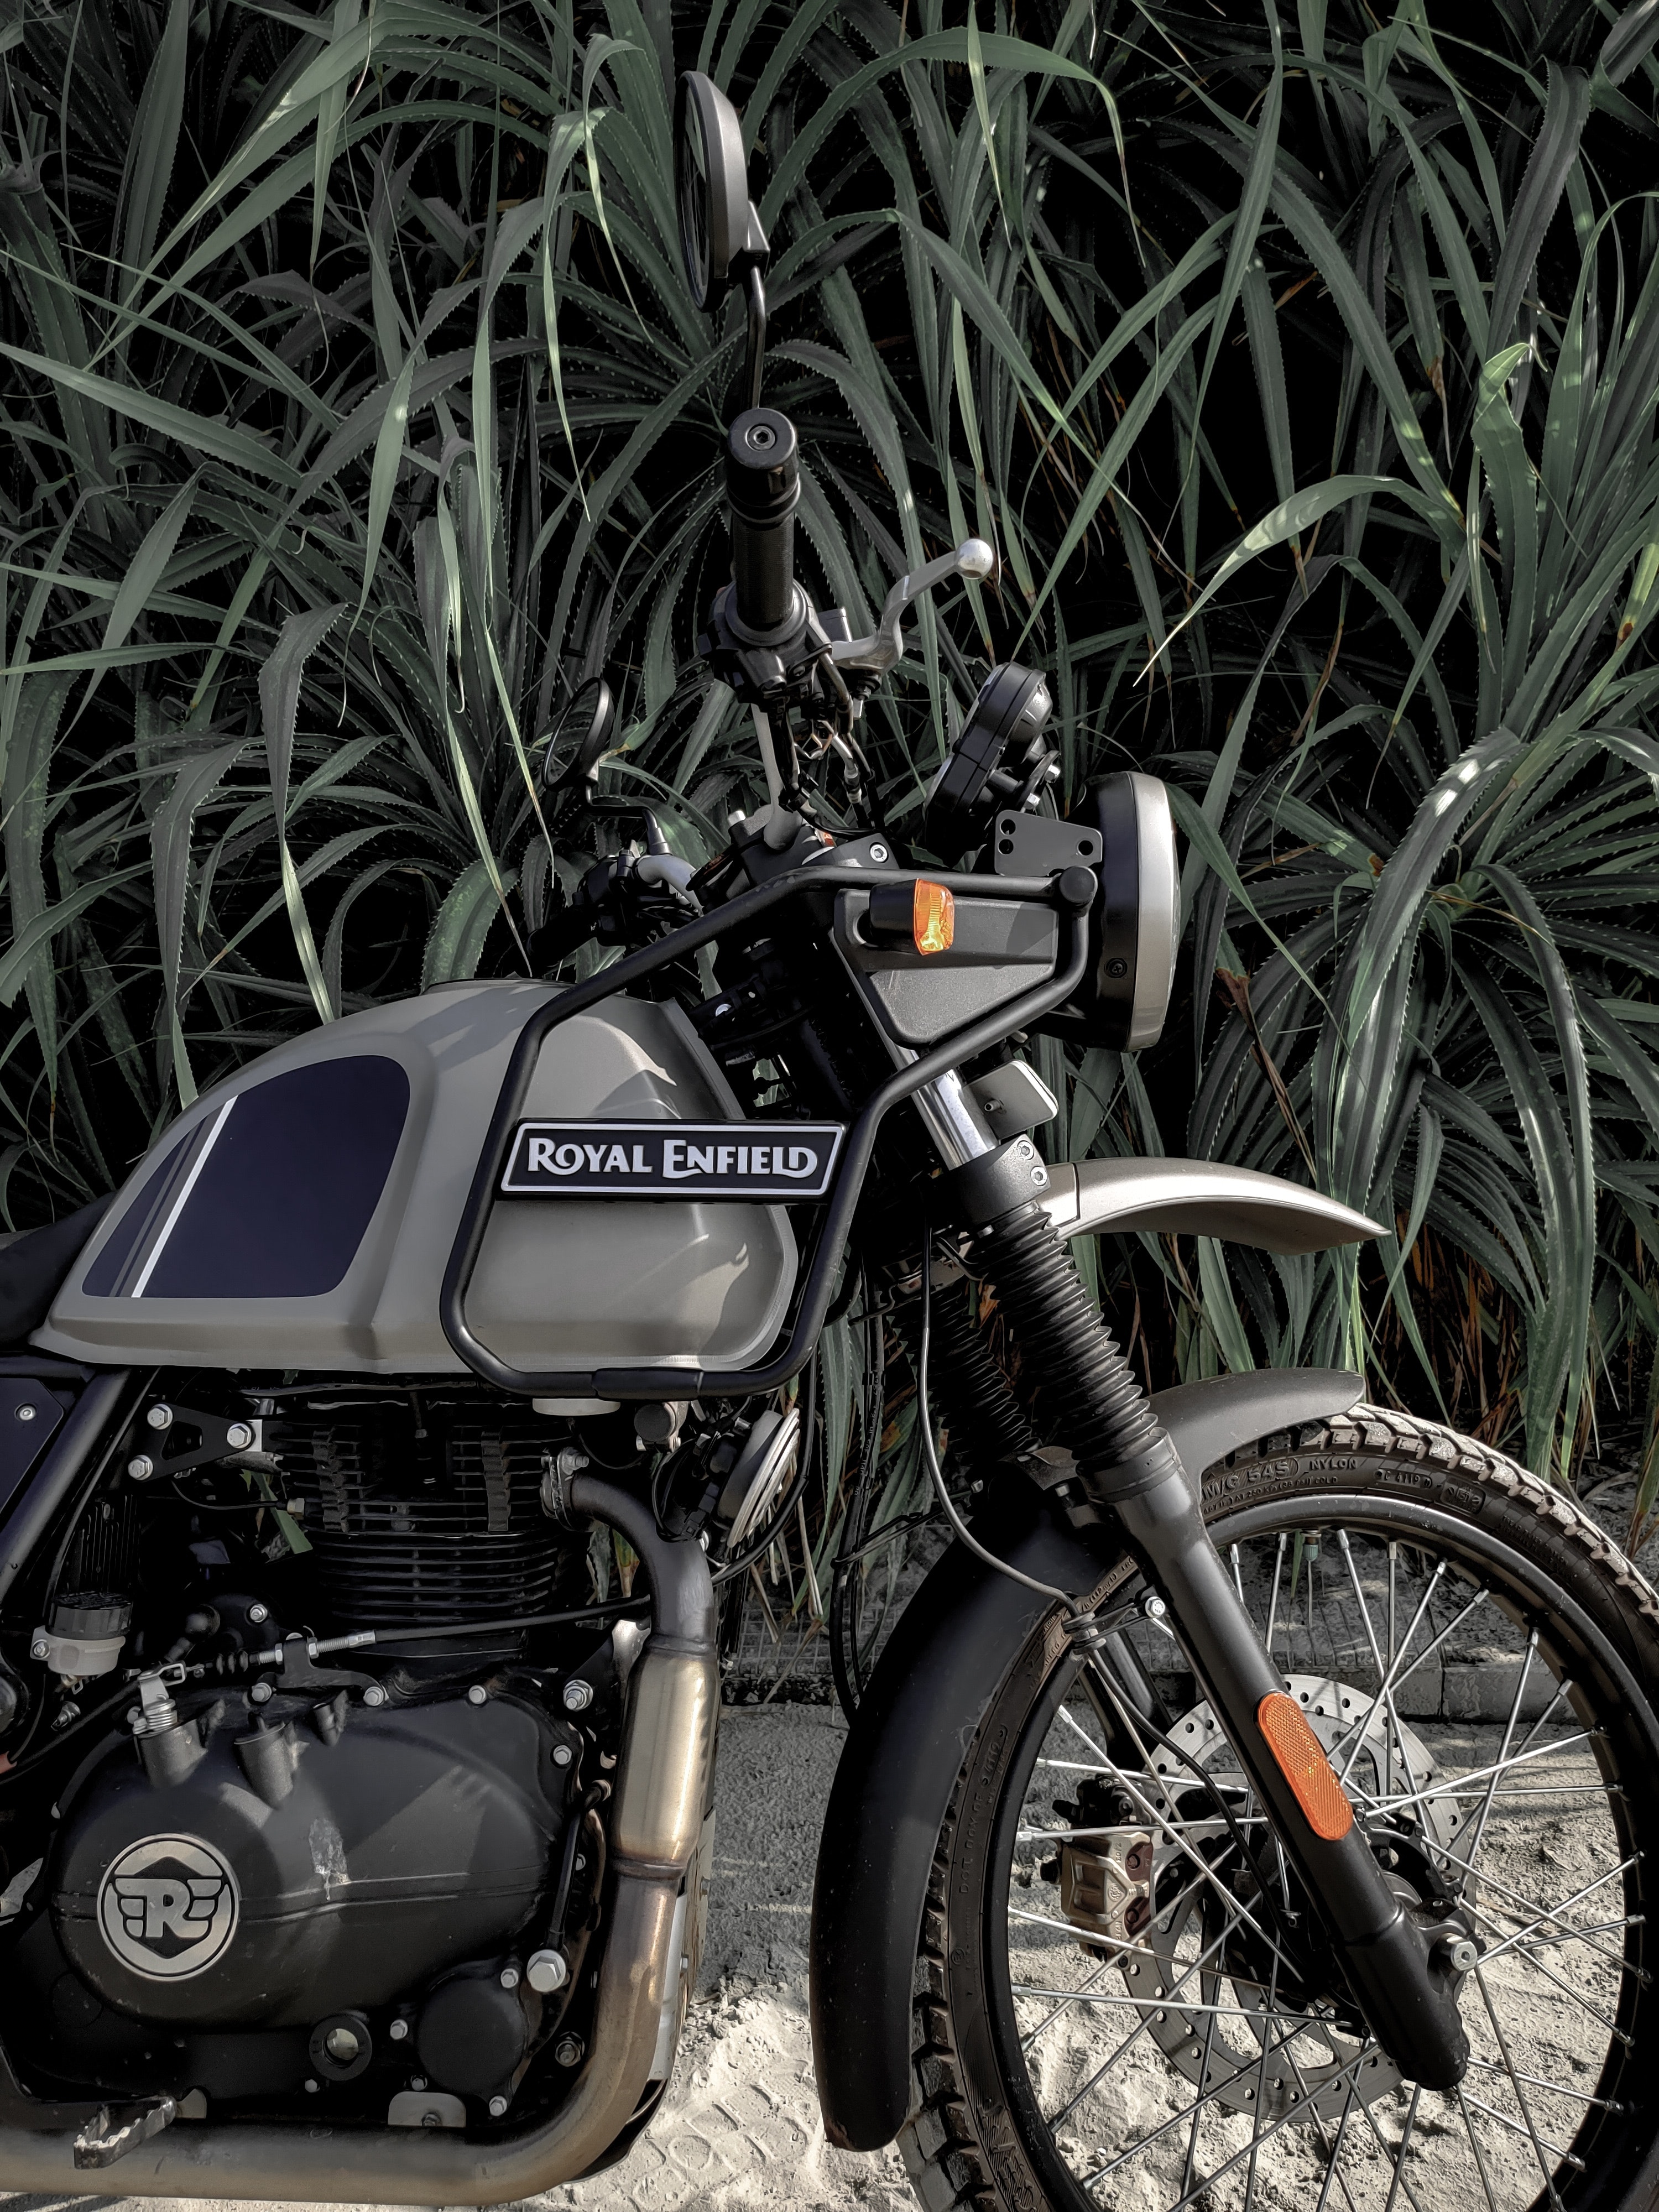 Royal Enfield Live - Himalayan With Grass Background